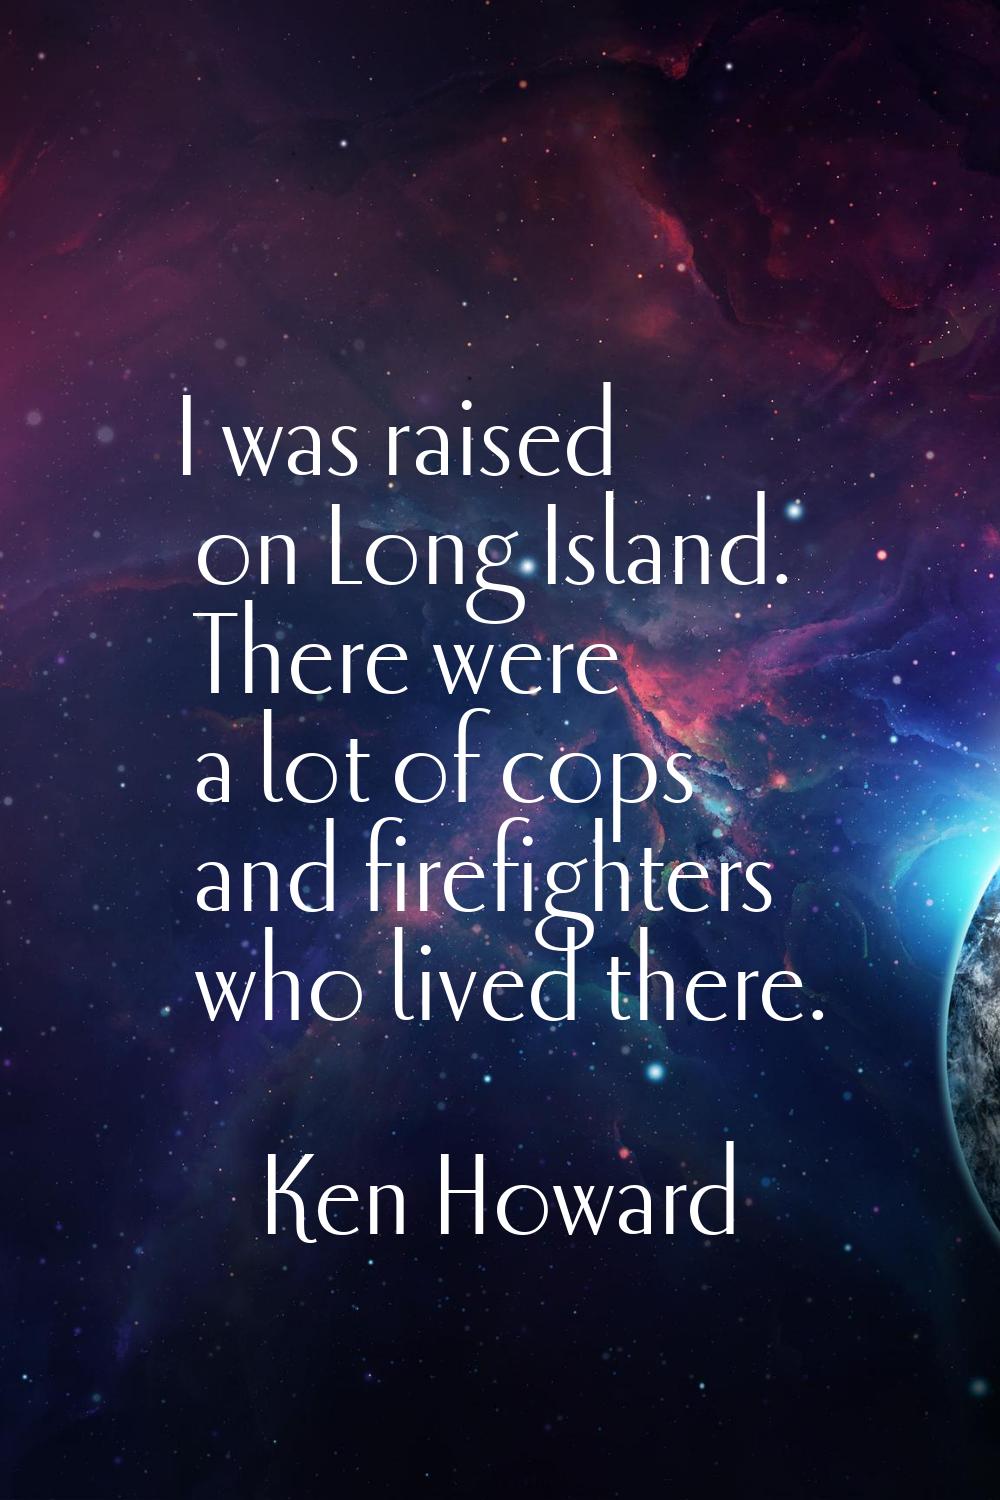 I was raised on Long Island. There were a lot of cops and firefighters who lived there.